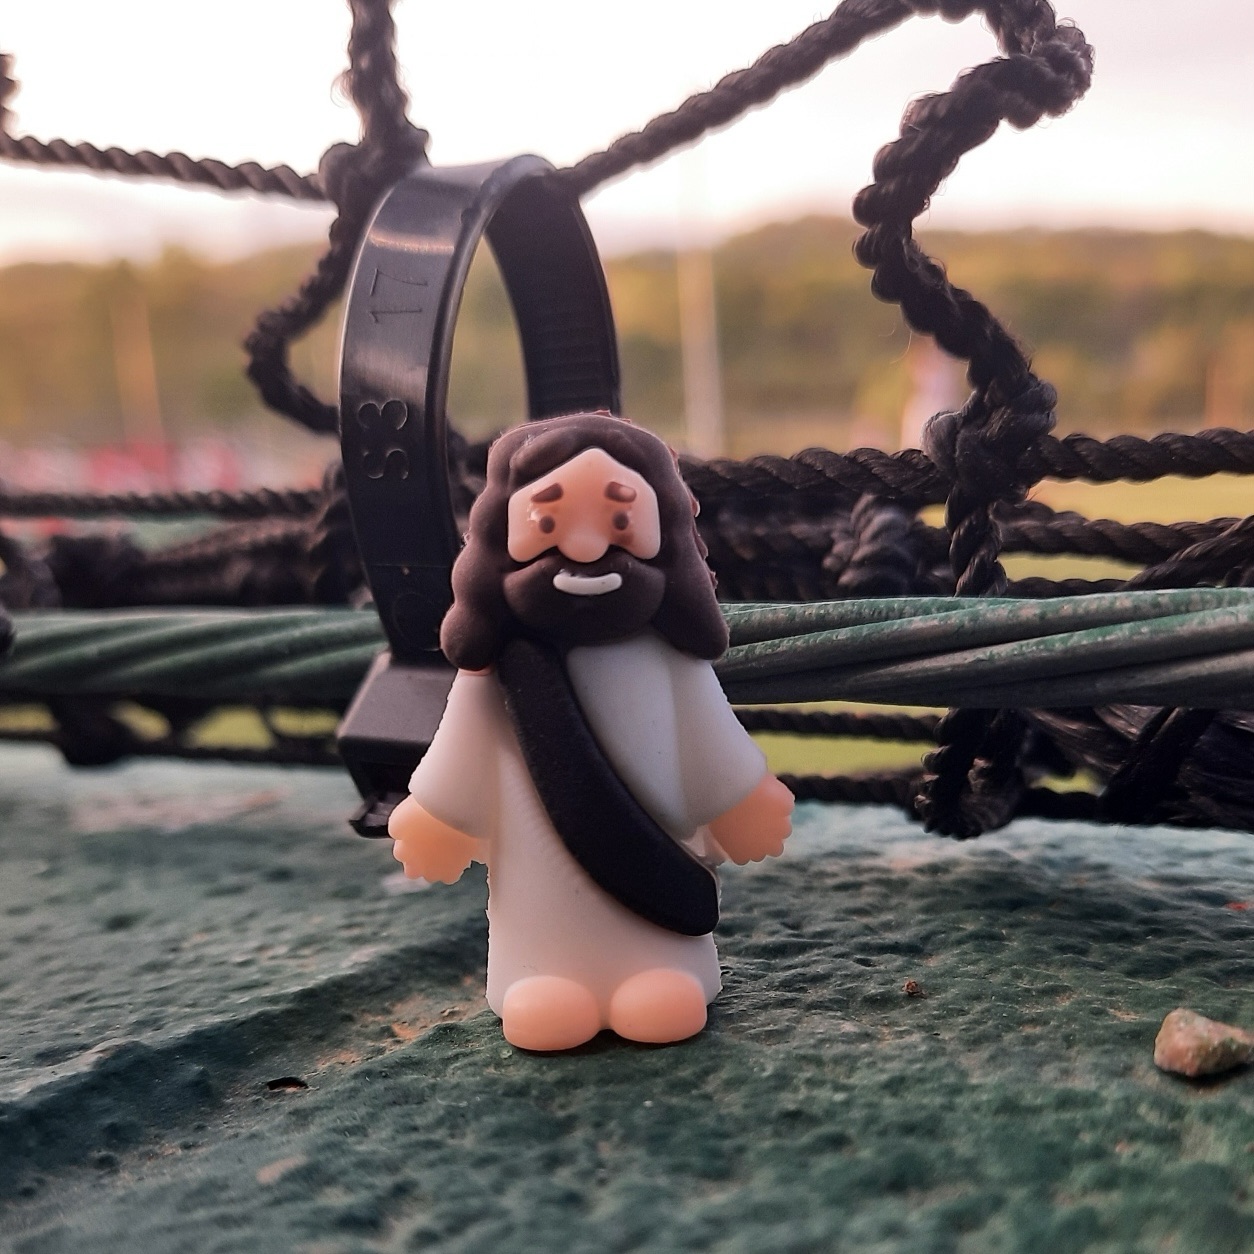 Jesus is at the baseball field and the softball field. #baseball #softball #minijesus Photo Credit: Heather Patterson